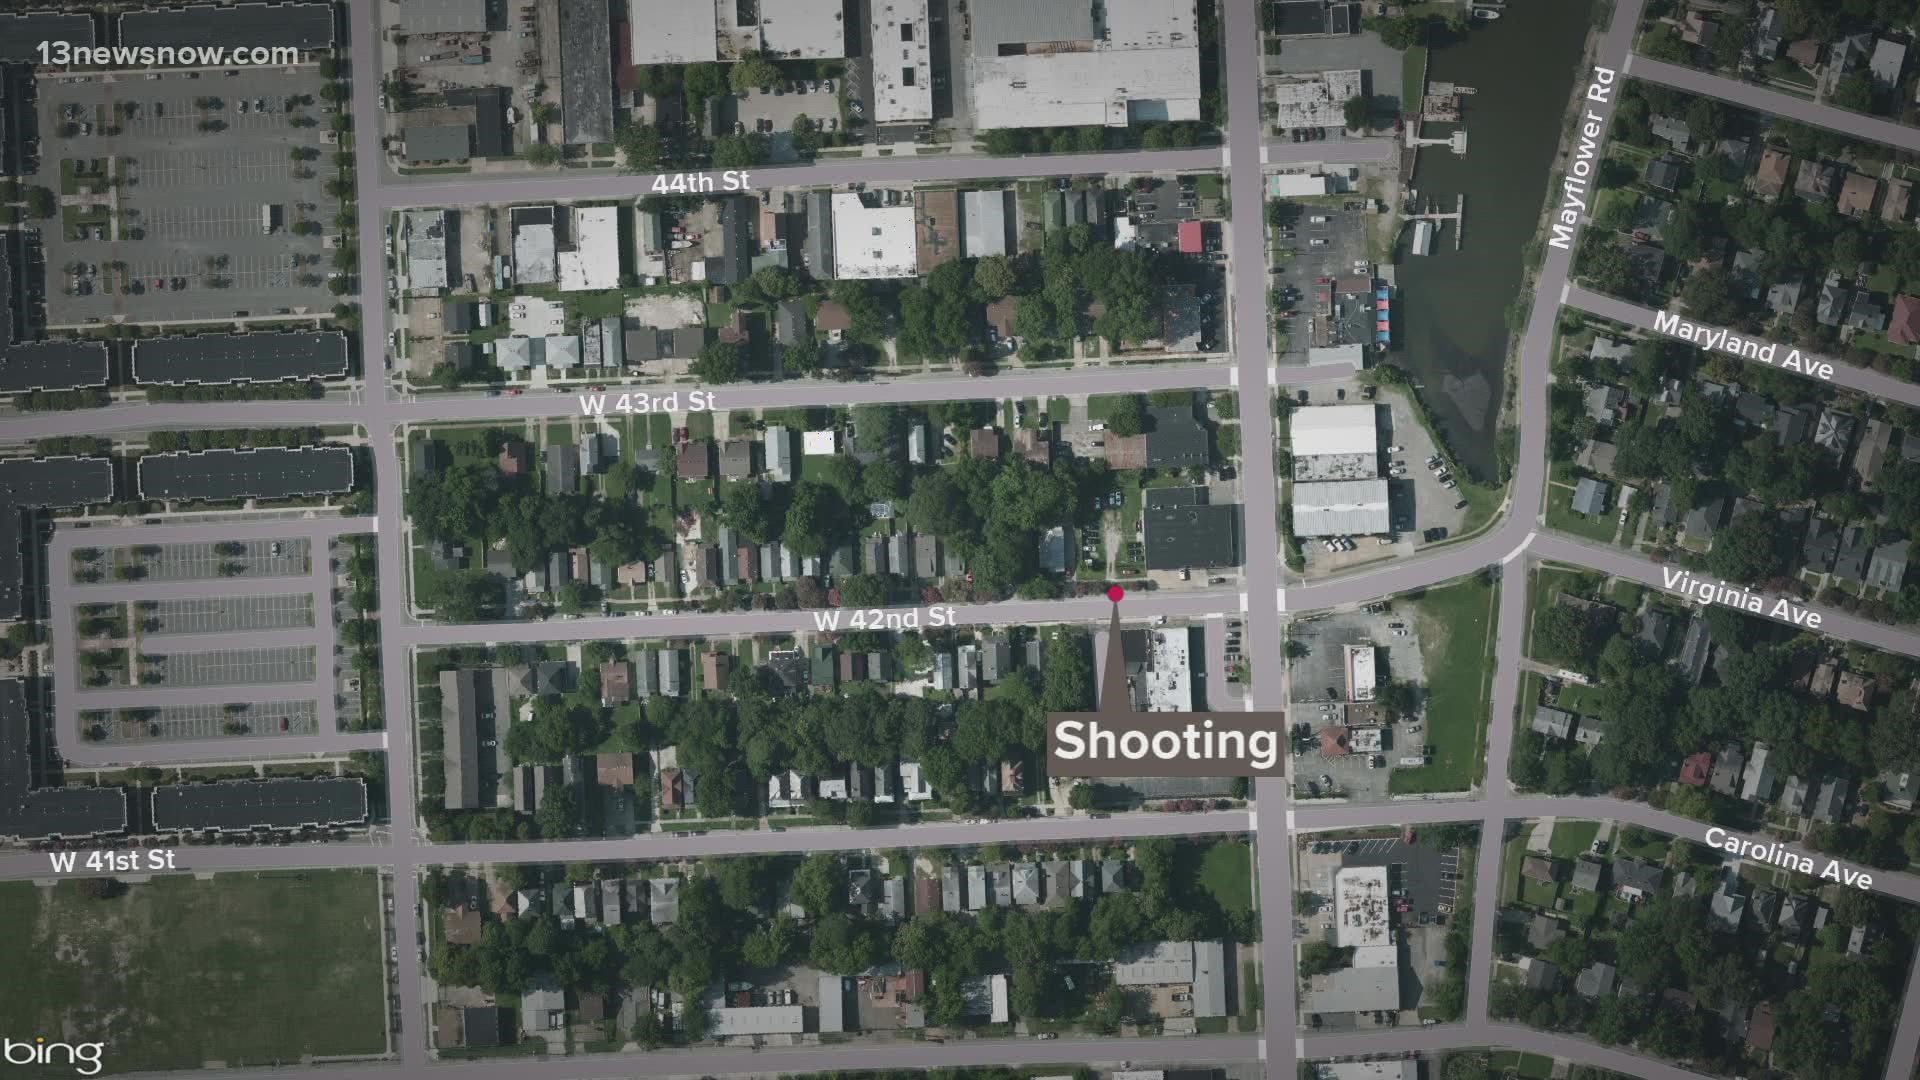 Police say a man is suffering from life-threatening injuries following a "domestic-related" shooting.